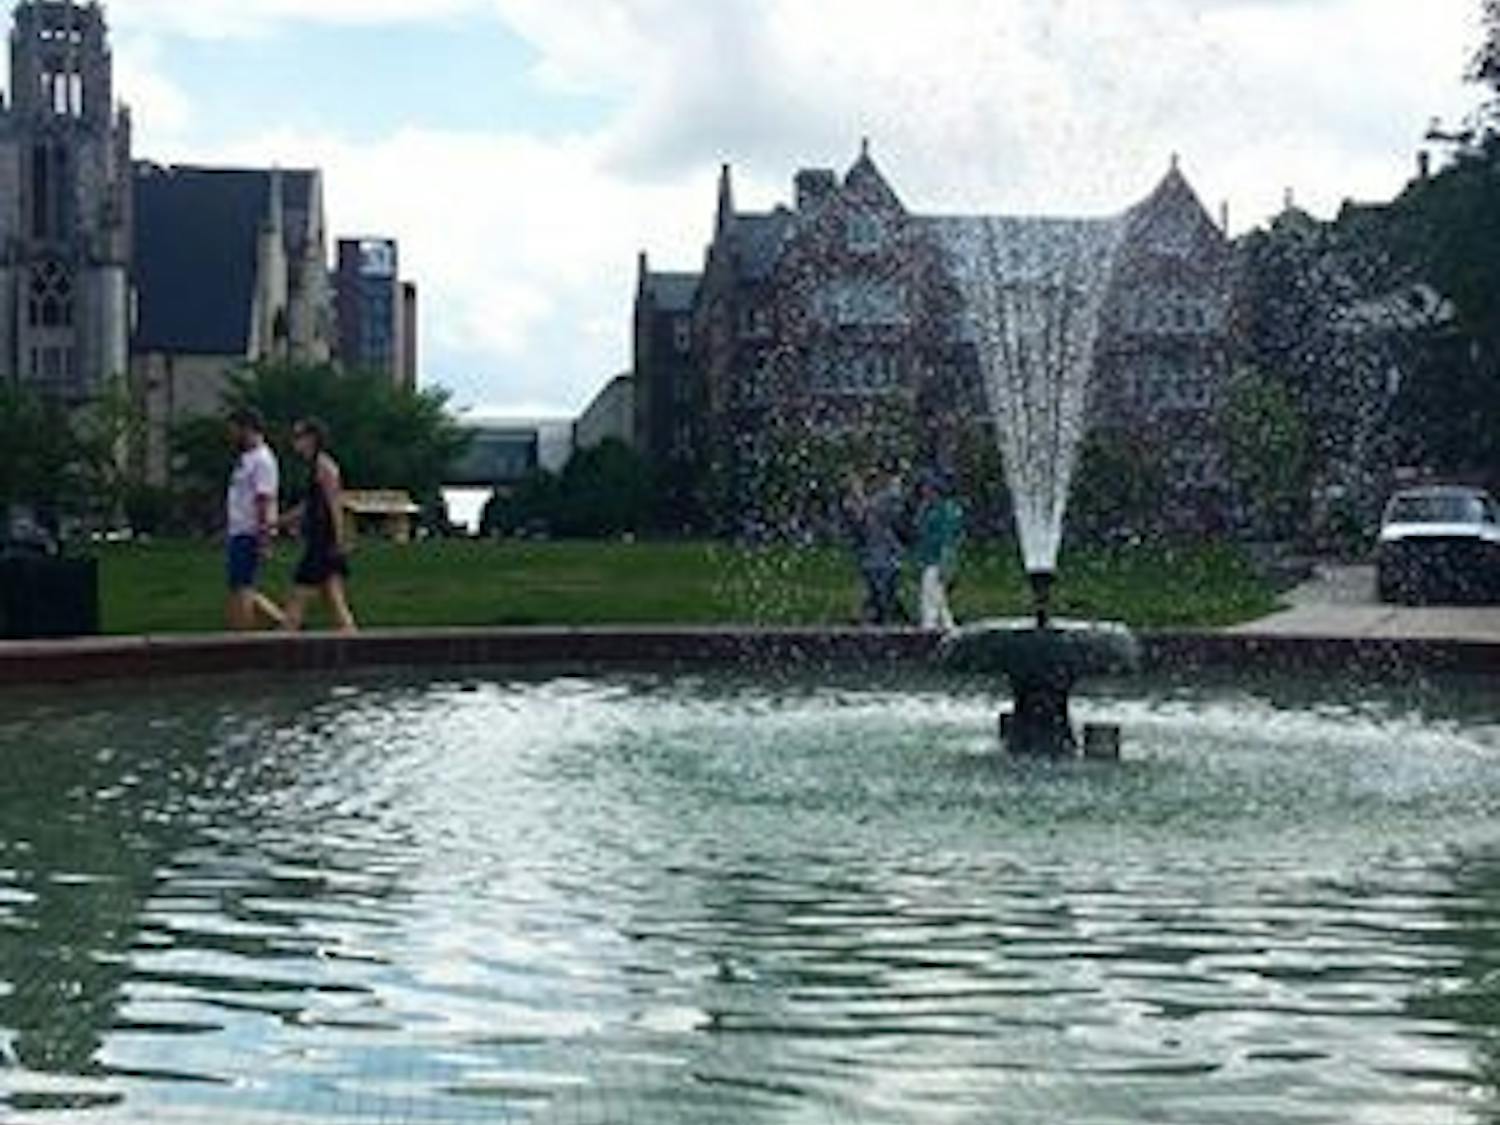 After six years of inactivity, Hagenah Fountain on Library Mall started to flow again Monday.